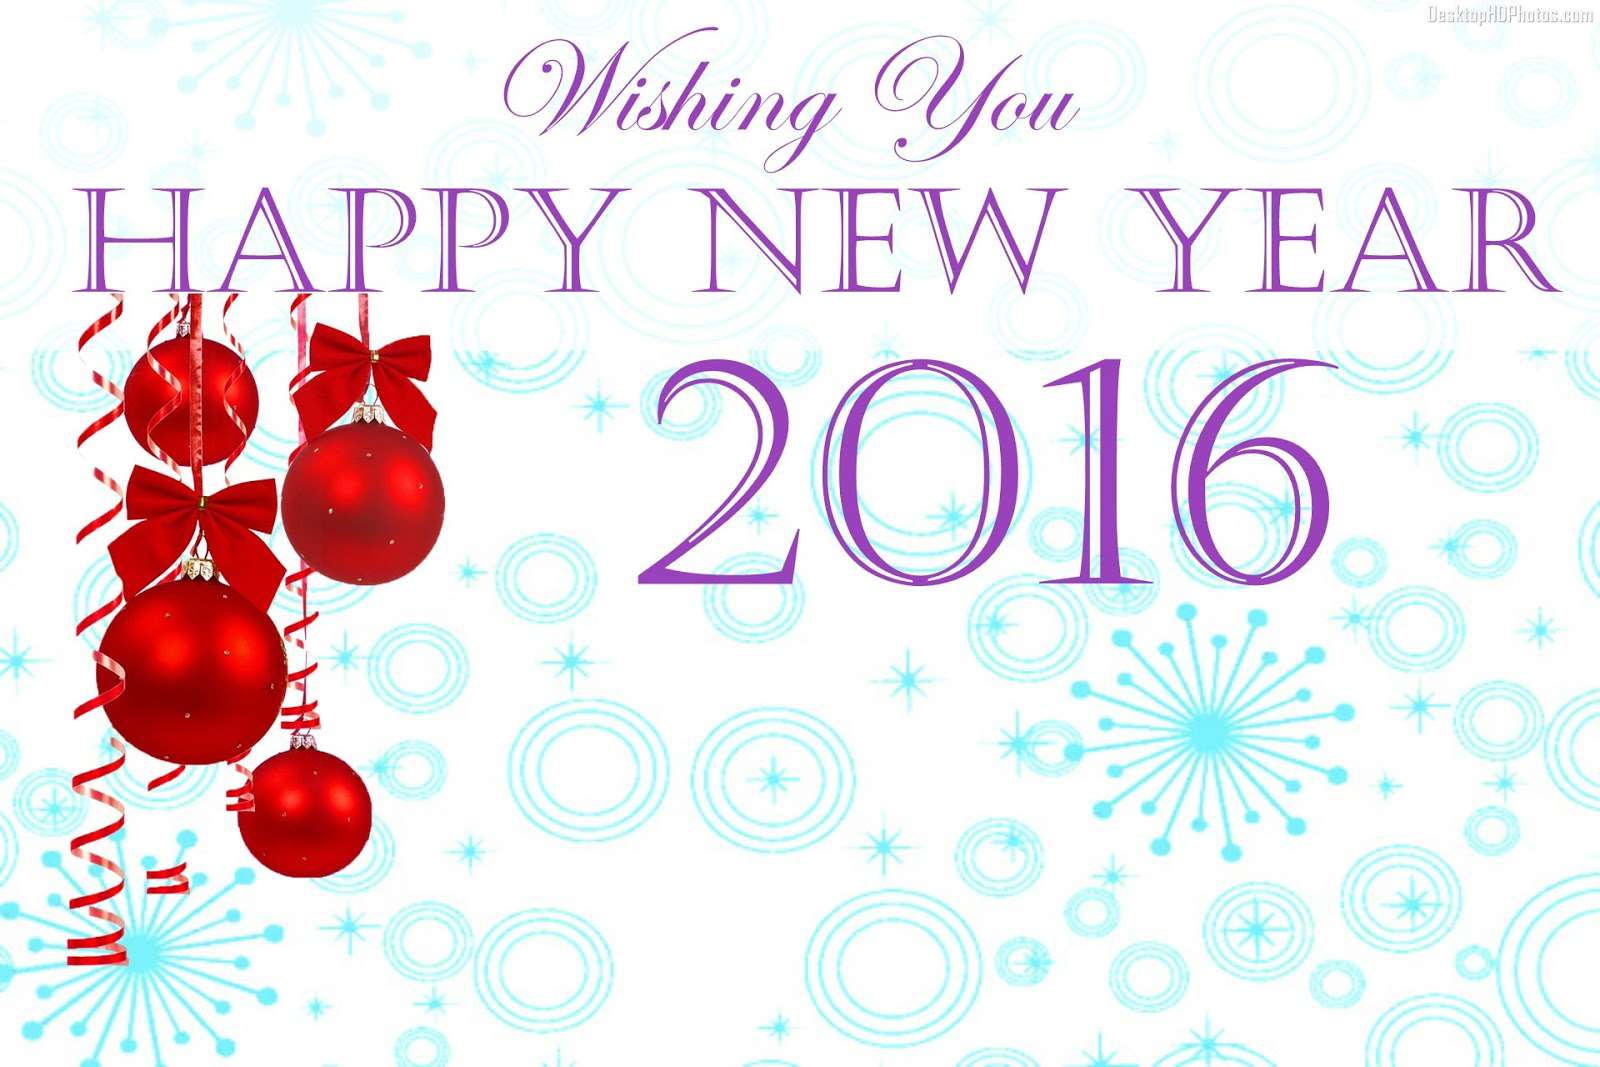 New Year 2016 Christian Free Clipart.